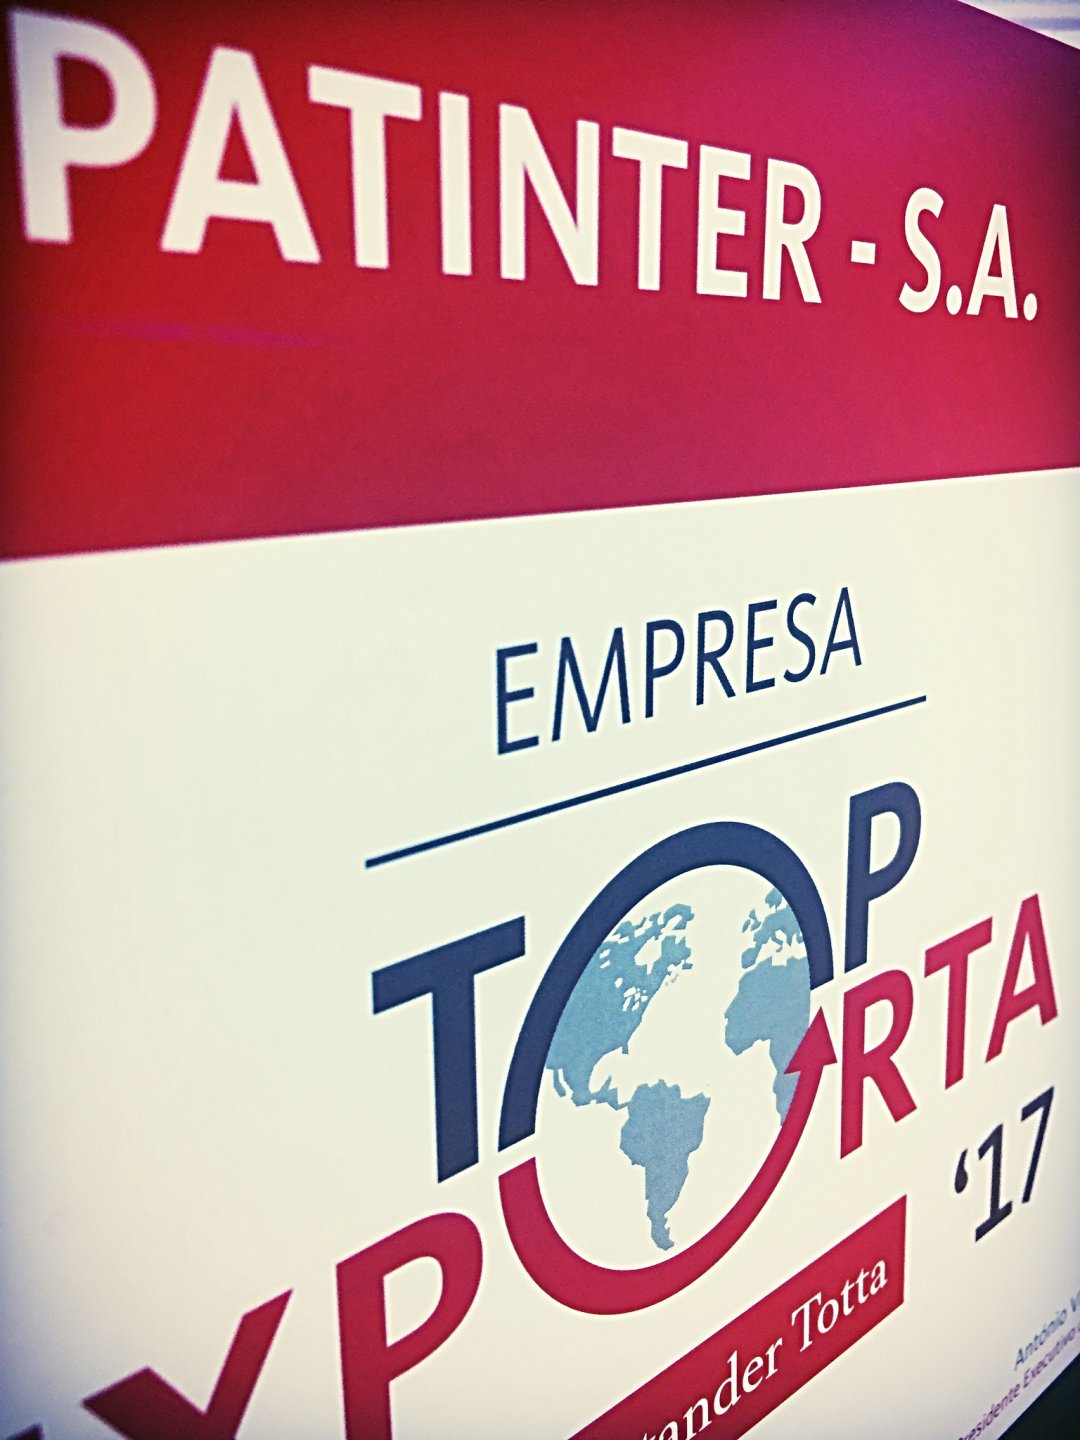 Patinter distinguished with TOP EXPORTA award